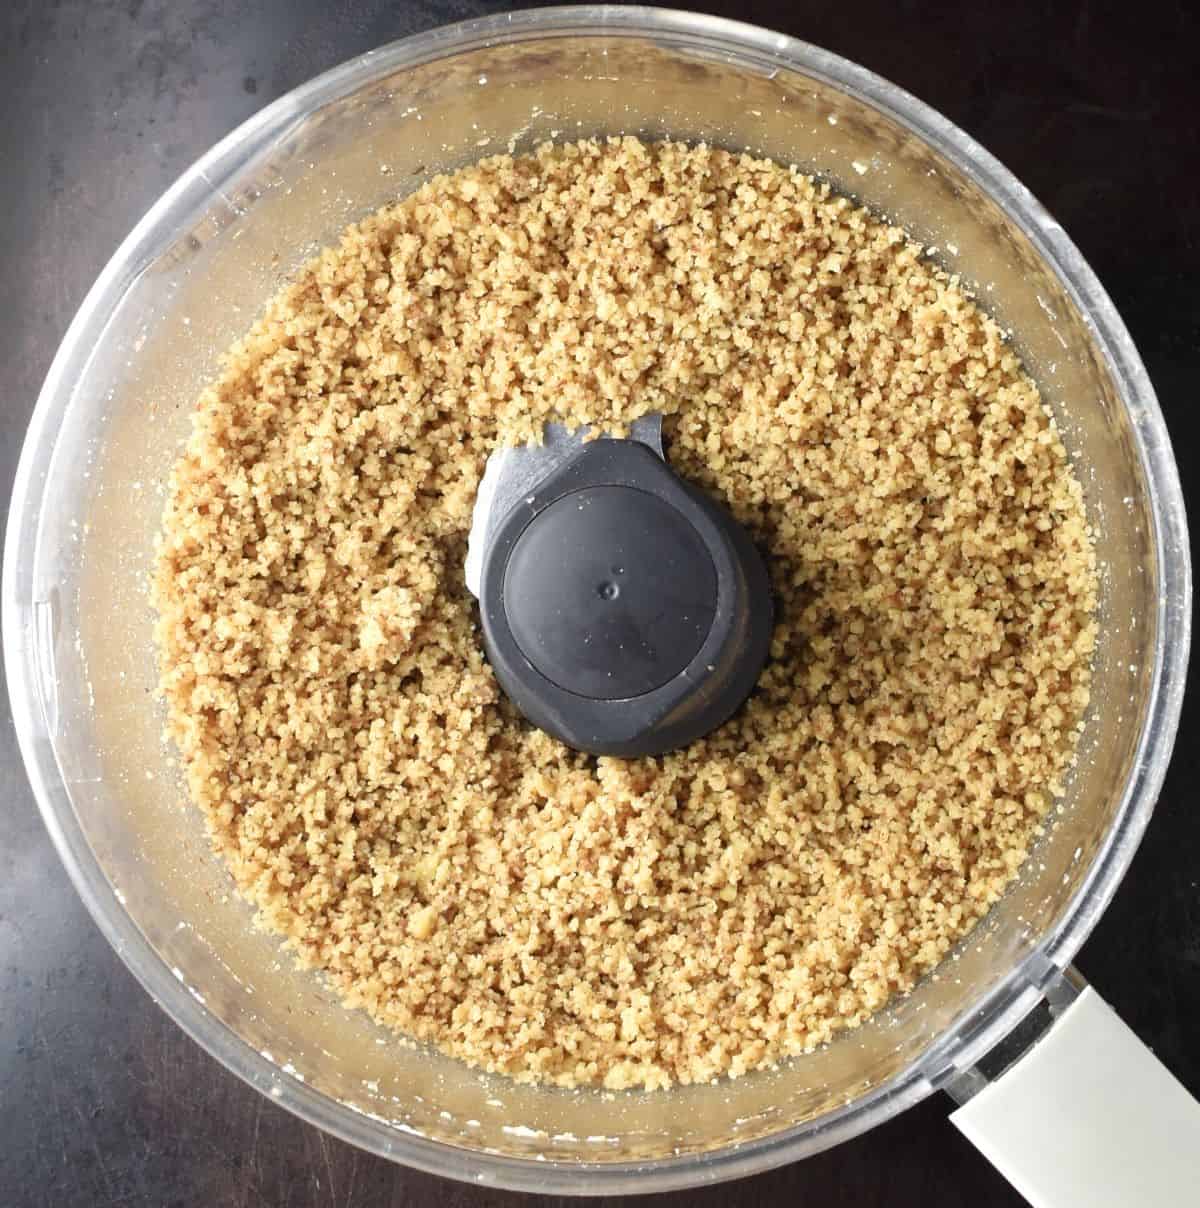 Top down view of ground walnuts in food processor.